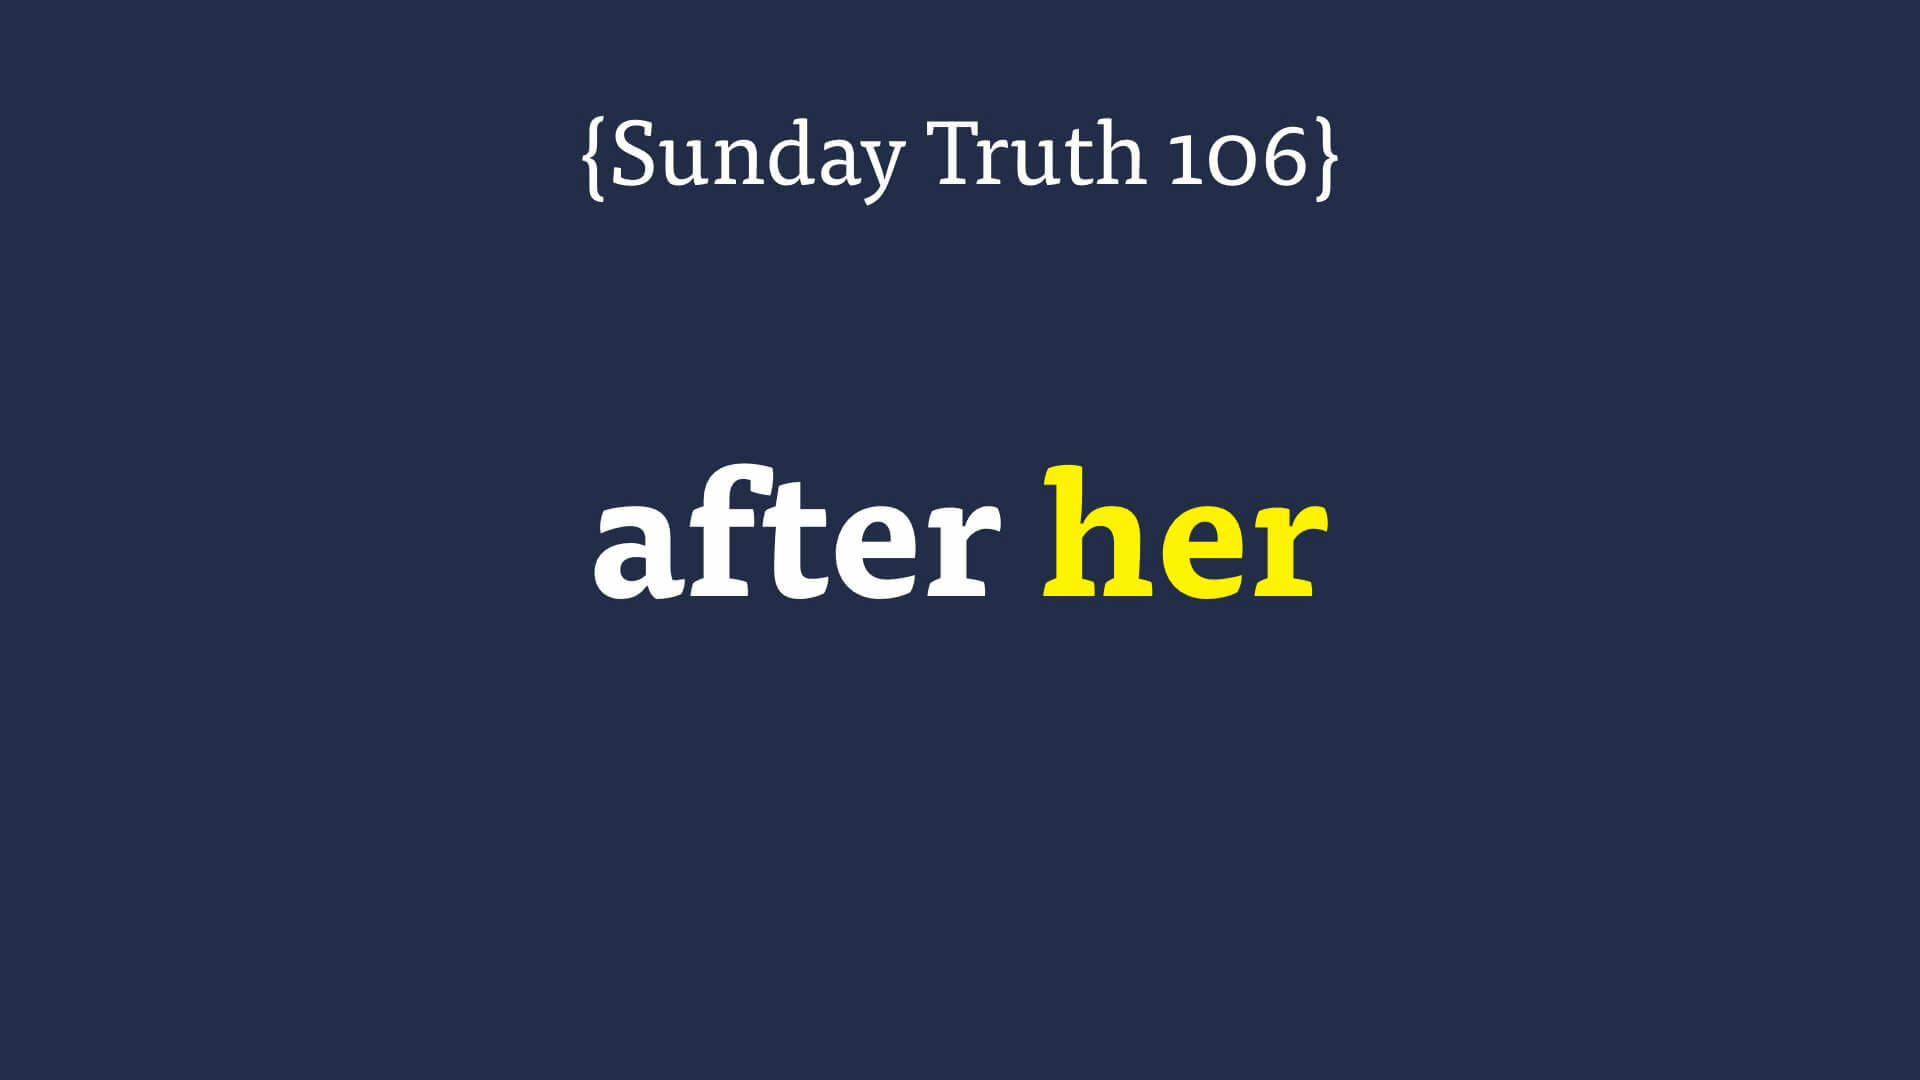 202301152235 🔵 after her {Sunday Truth 106}.jpg